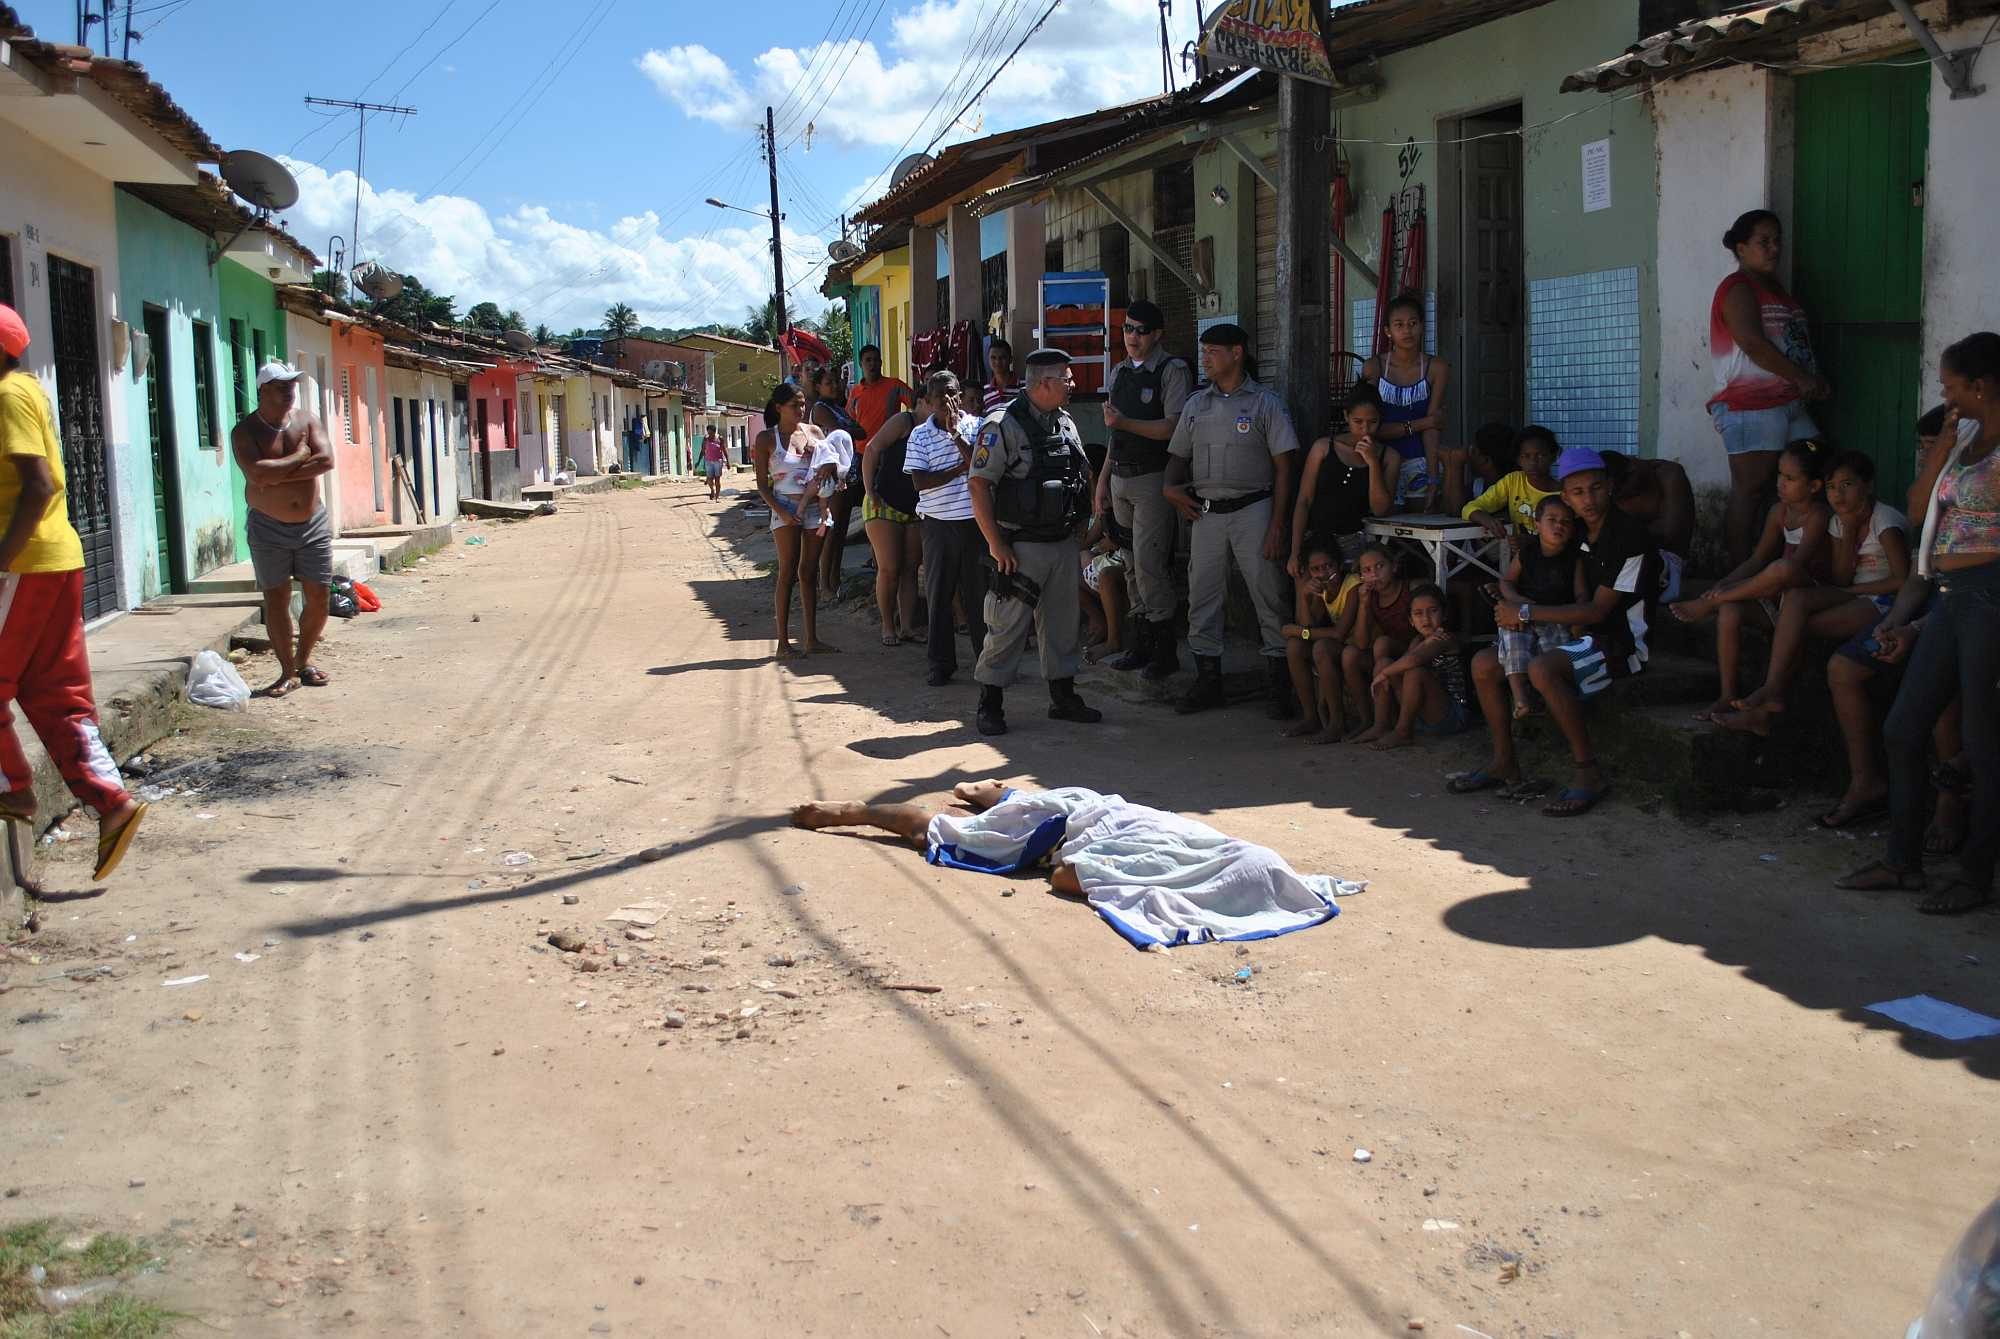 Victim was killed in the street in Alagoas state - Photo: Alagoas 24 Horas